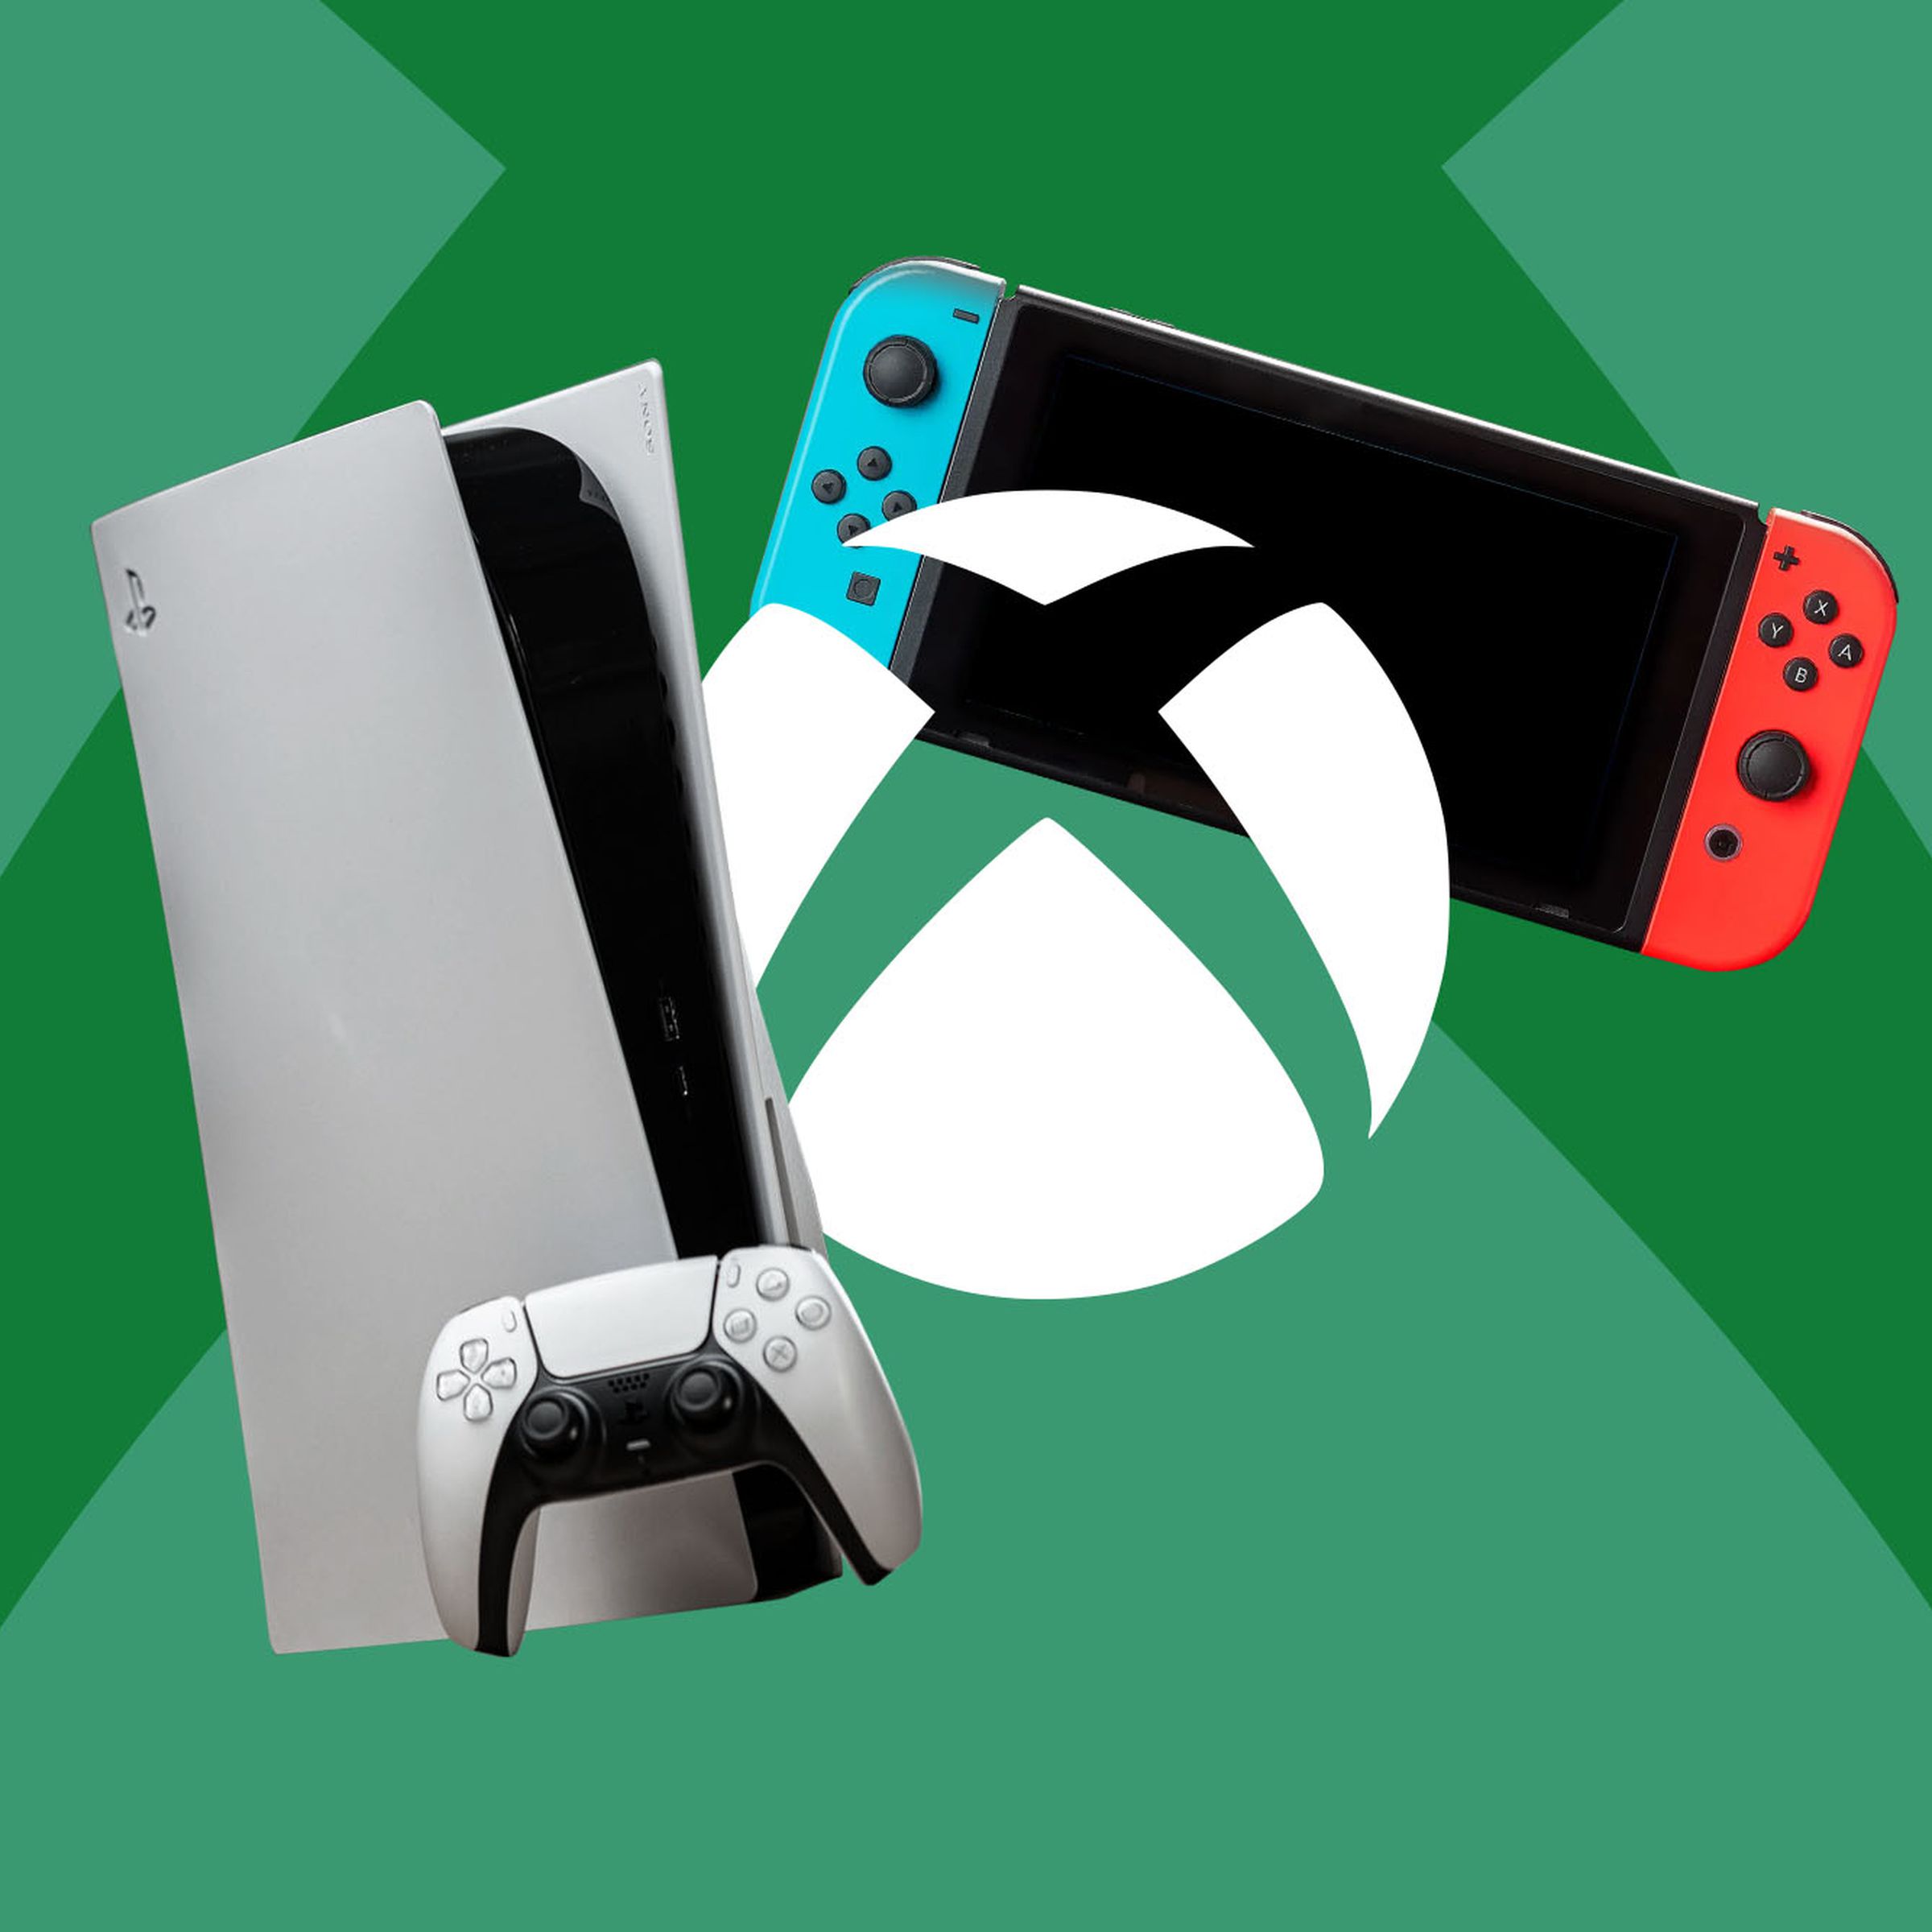 Illustration of a PS5 and a Nintendo Switch next to the Xbox logo.